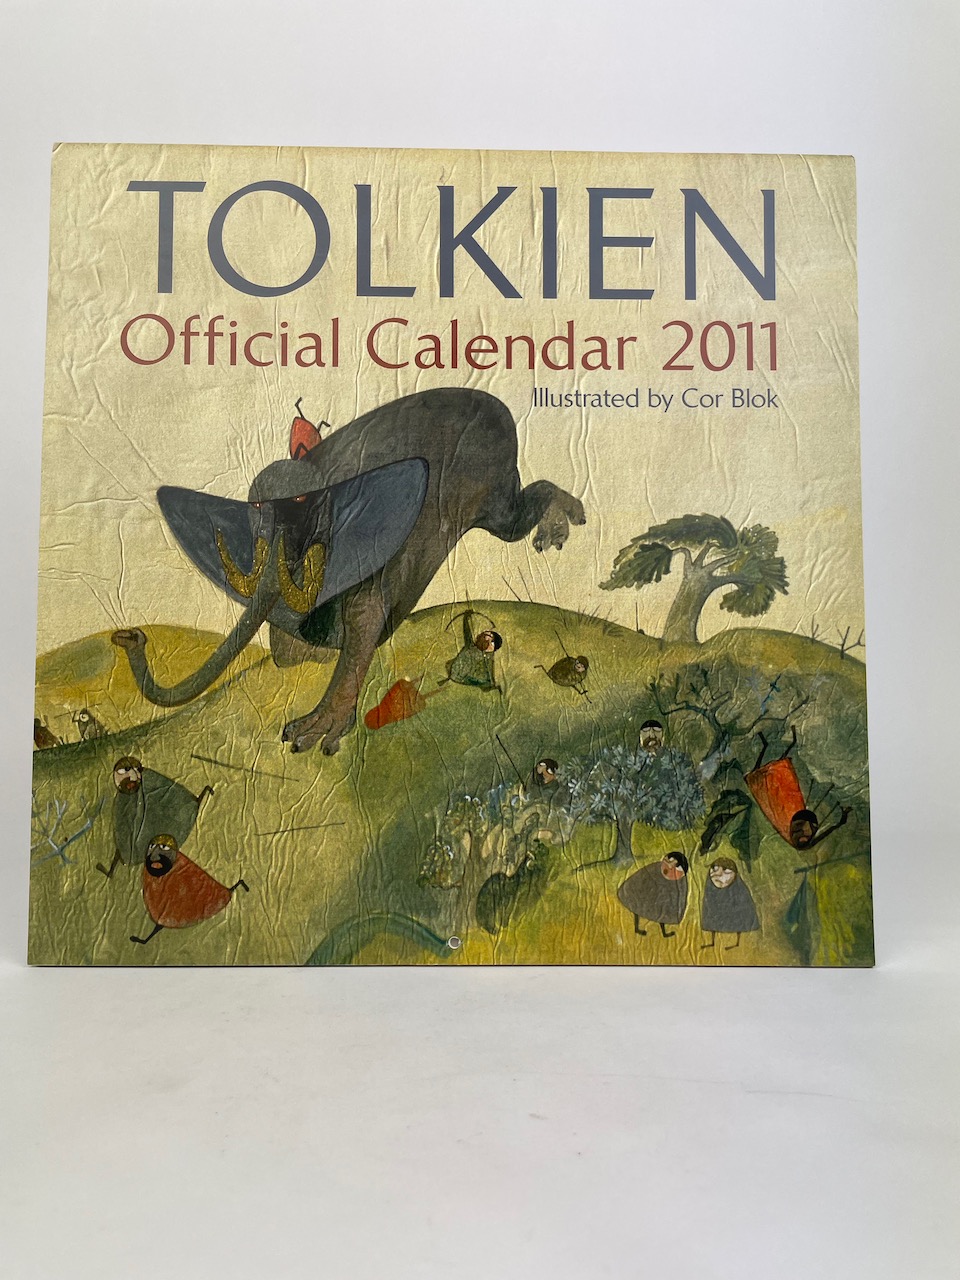 Tolkien Calendar 2011 features 13 paintings by the artist Cor Blok - signed